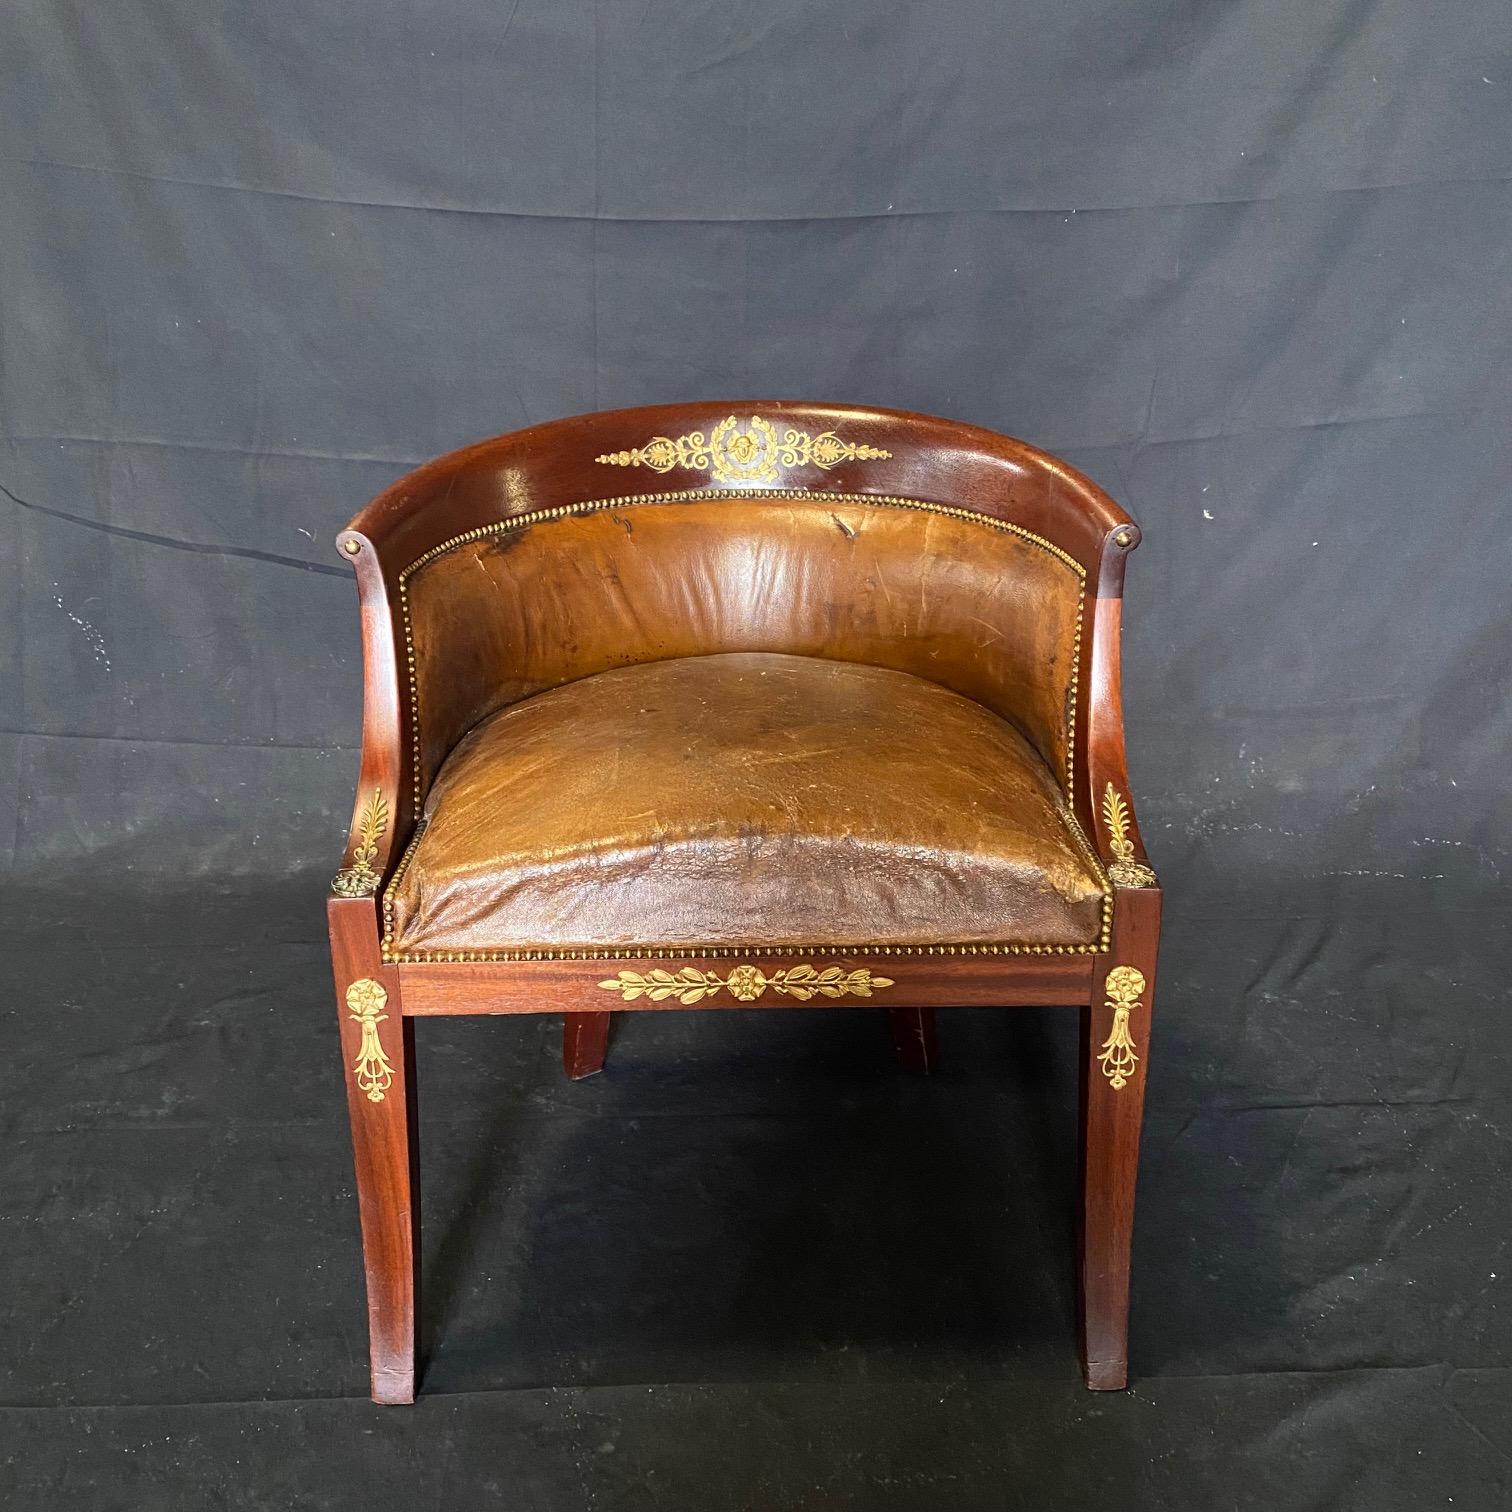 Beautiful aged French leather and walnut neoclassical desk or boudoir dressing table chair, in original leather with lovely brass tacking and stunning bronze jabots, with an acanthus leaf framed warrior head on the backrest crest.  arm height 26
